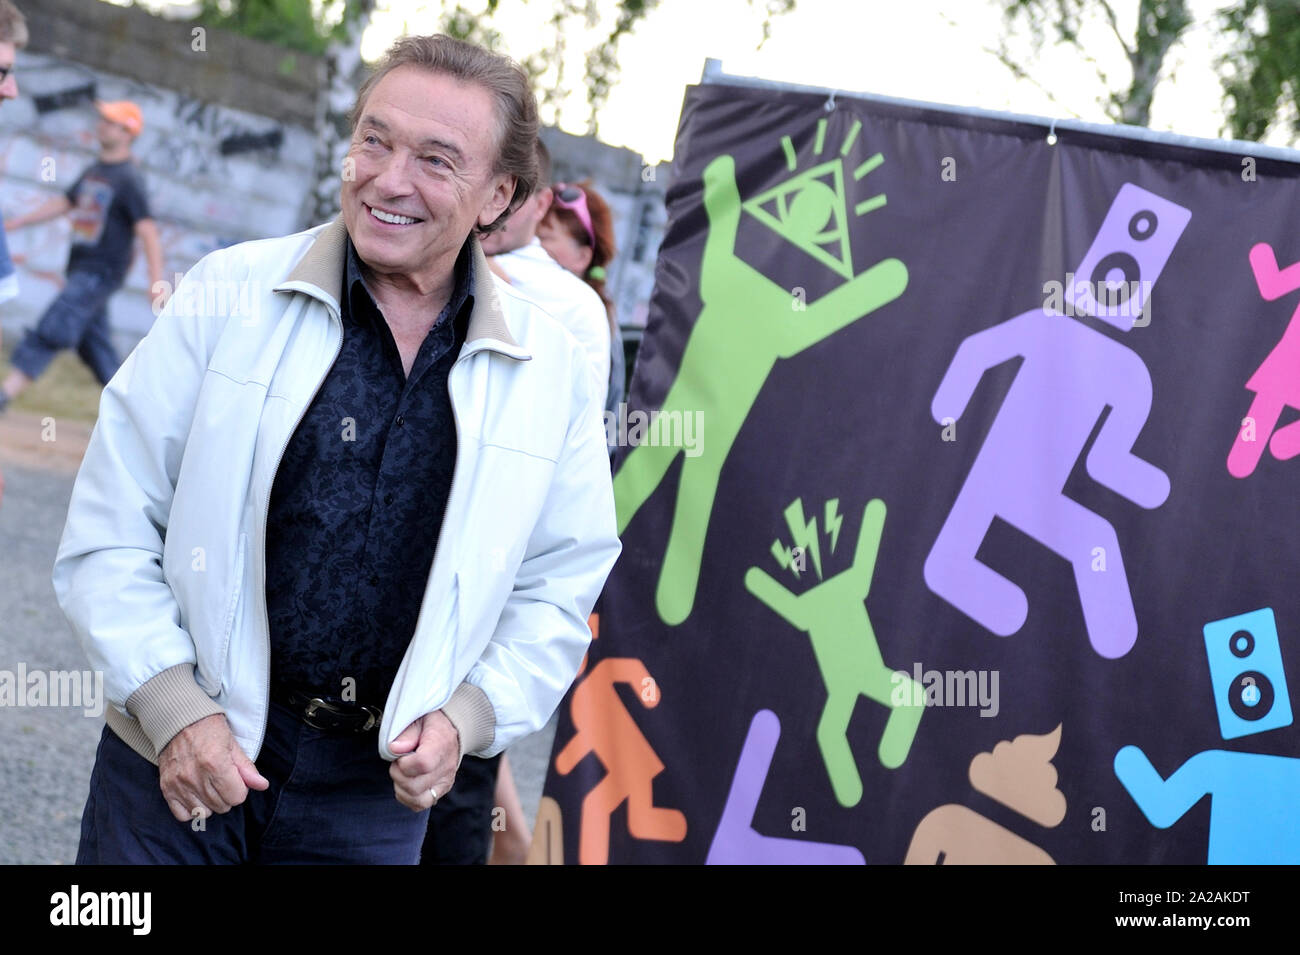 Hradec Kralove, Czech Republic. 04th July, 2013. Czech singer Karel Gott will perform for the first time within the music festival Rock for People in Hradec Kralove, Czech Republic on July 4, 2013. Credit: David Tanecek/CTK Photo/Alamy Live News Stock Photo